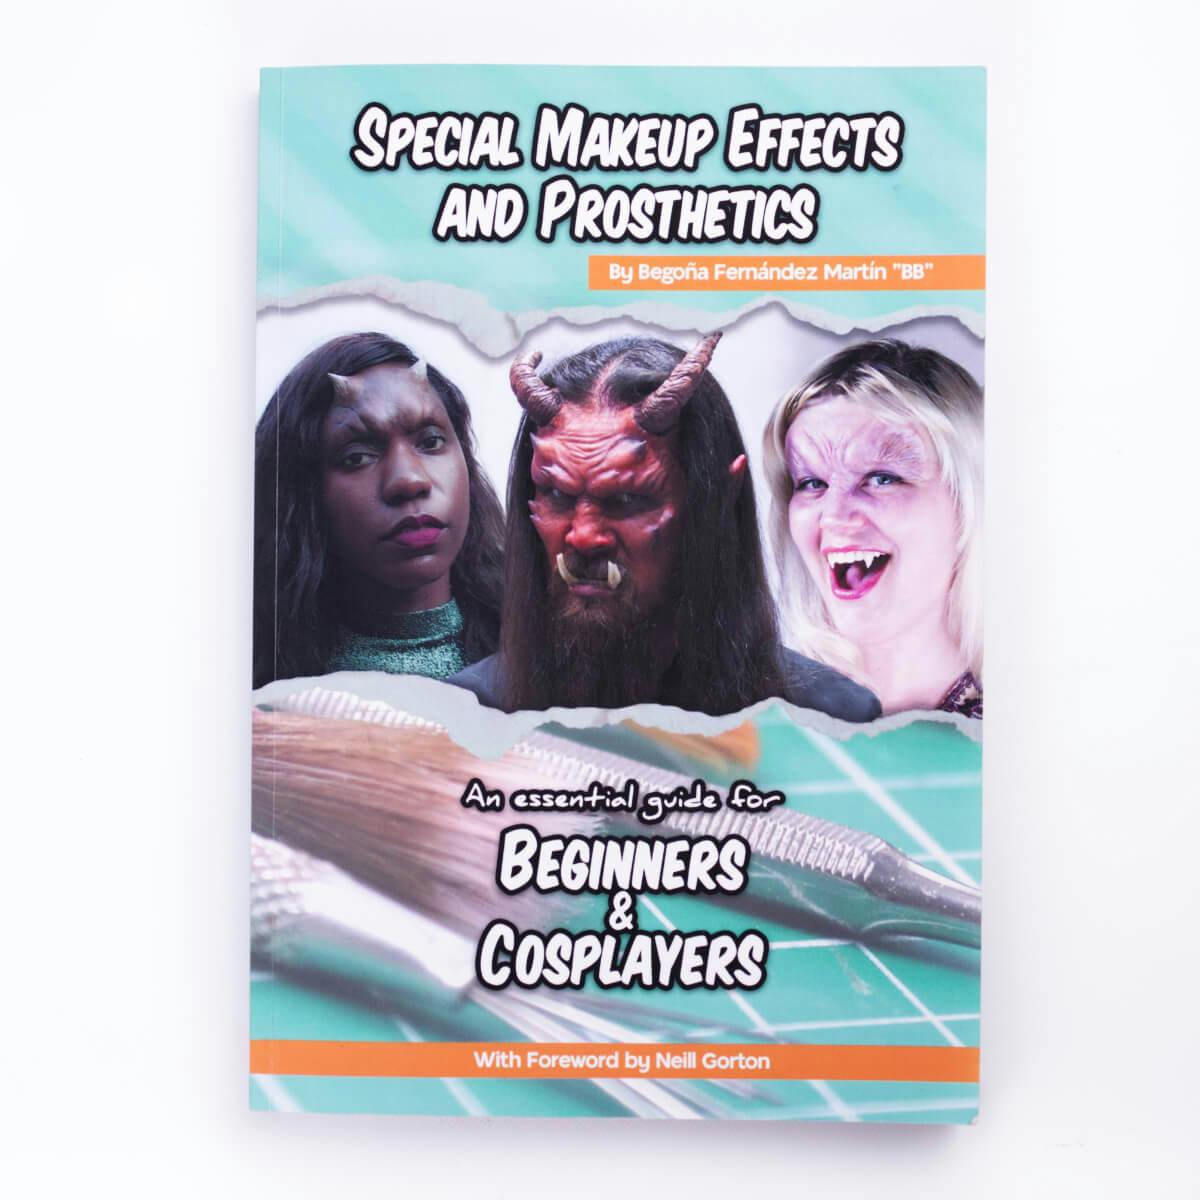 Book Special Makeup Effects and Prosthetics - the essential guide for beginners and cosplayers by Begoña Fernández Martín